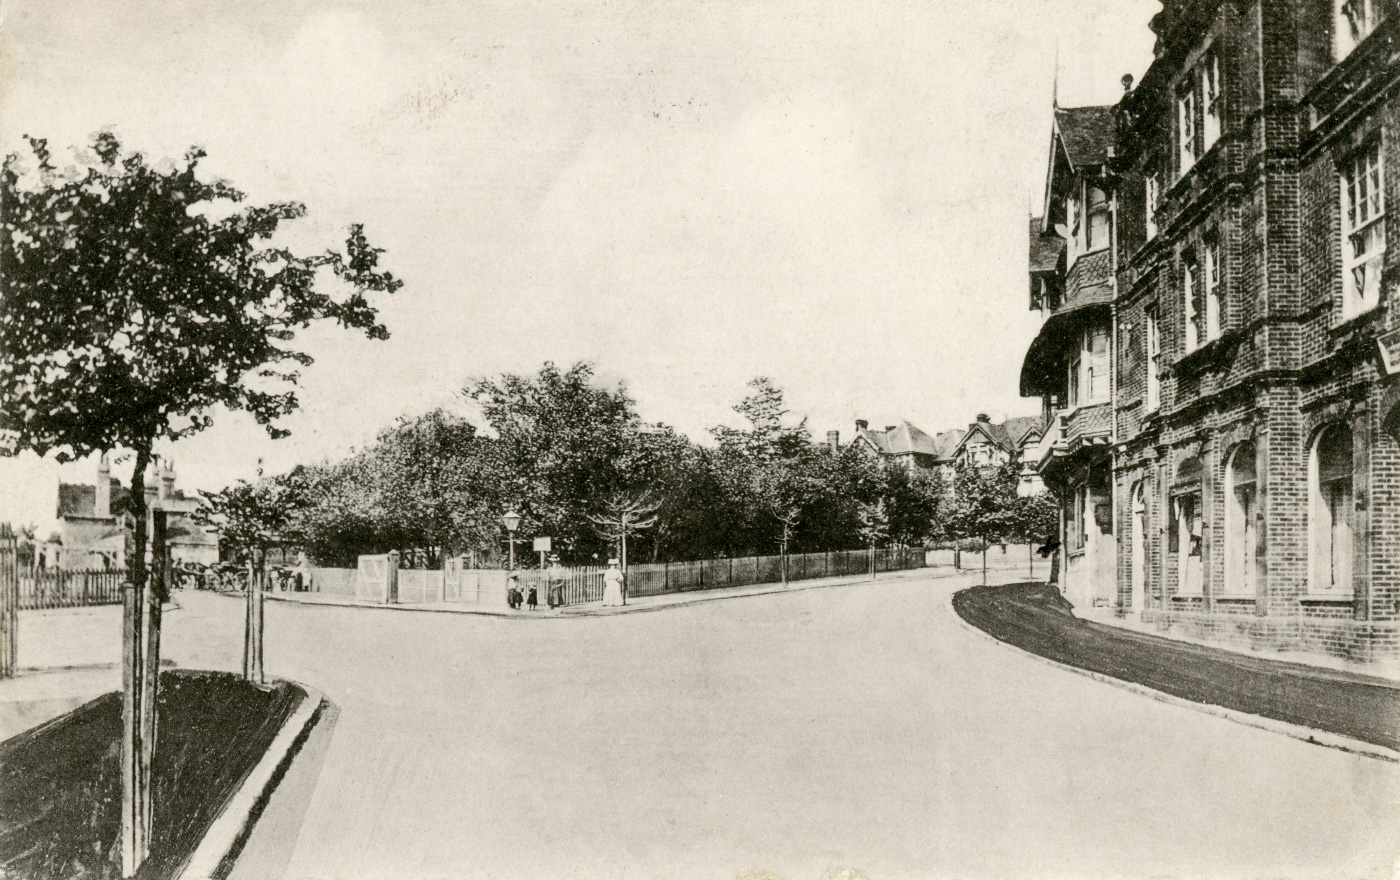 Station Road and Railway Station in 1908